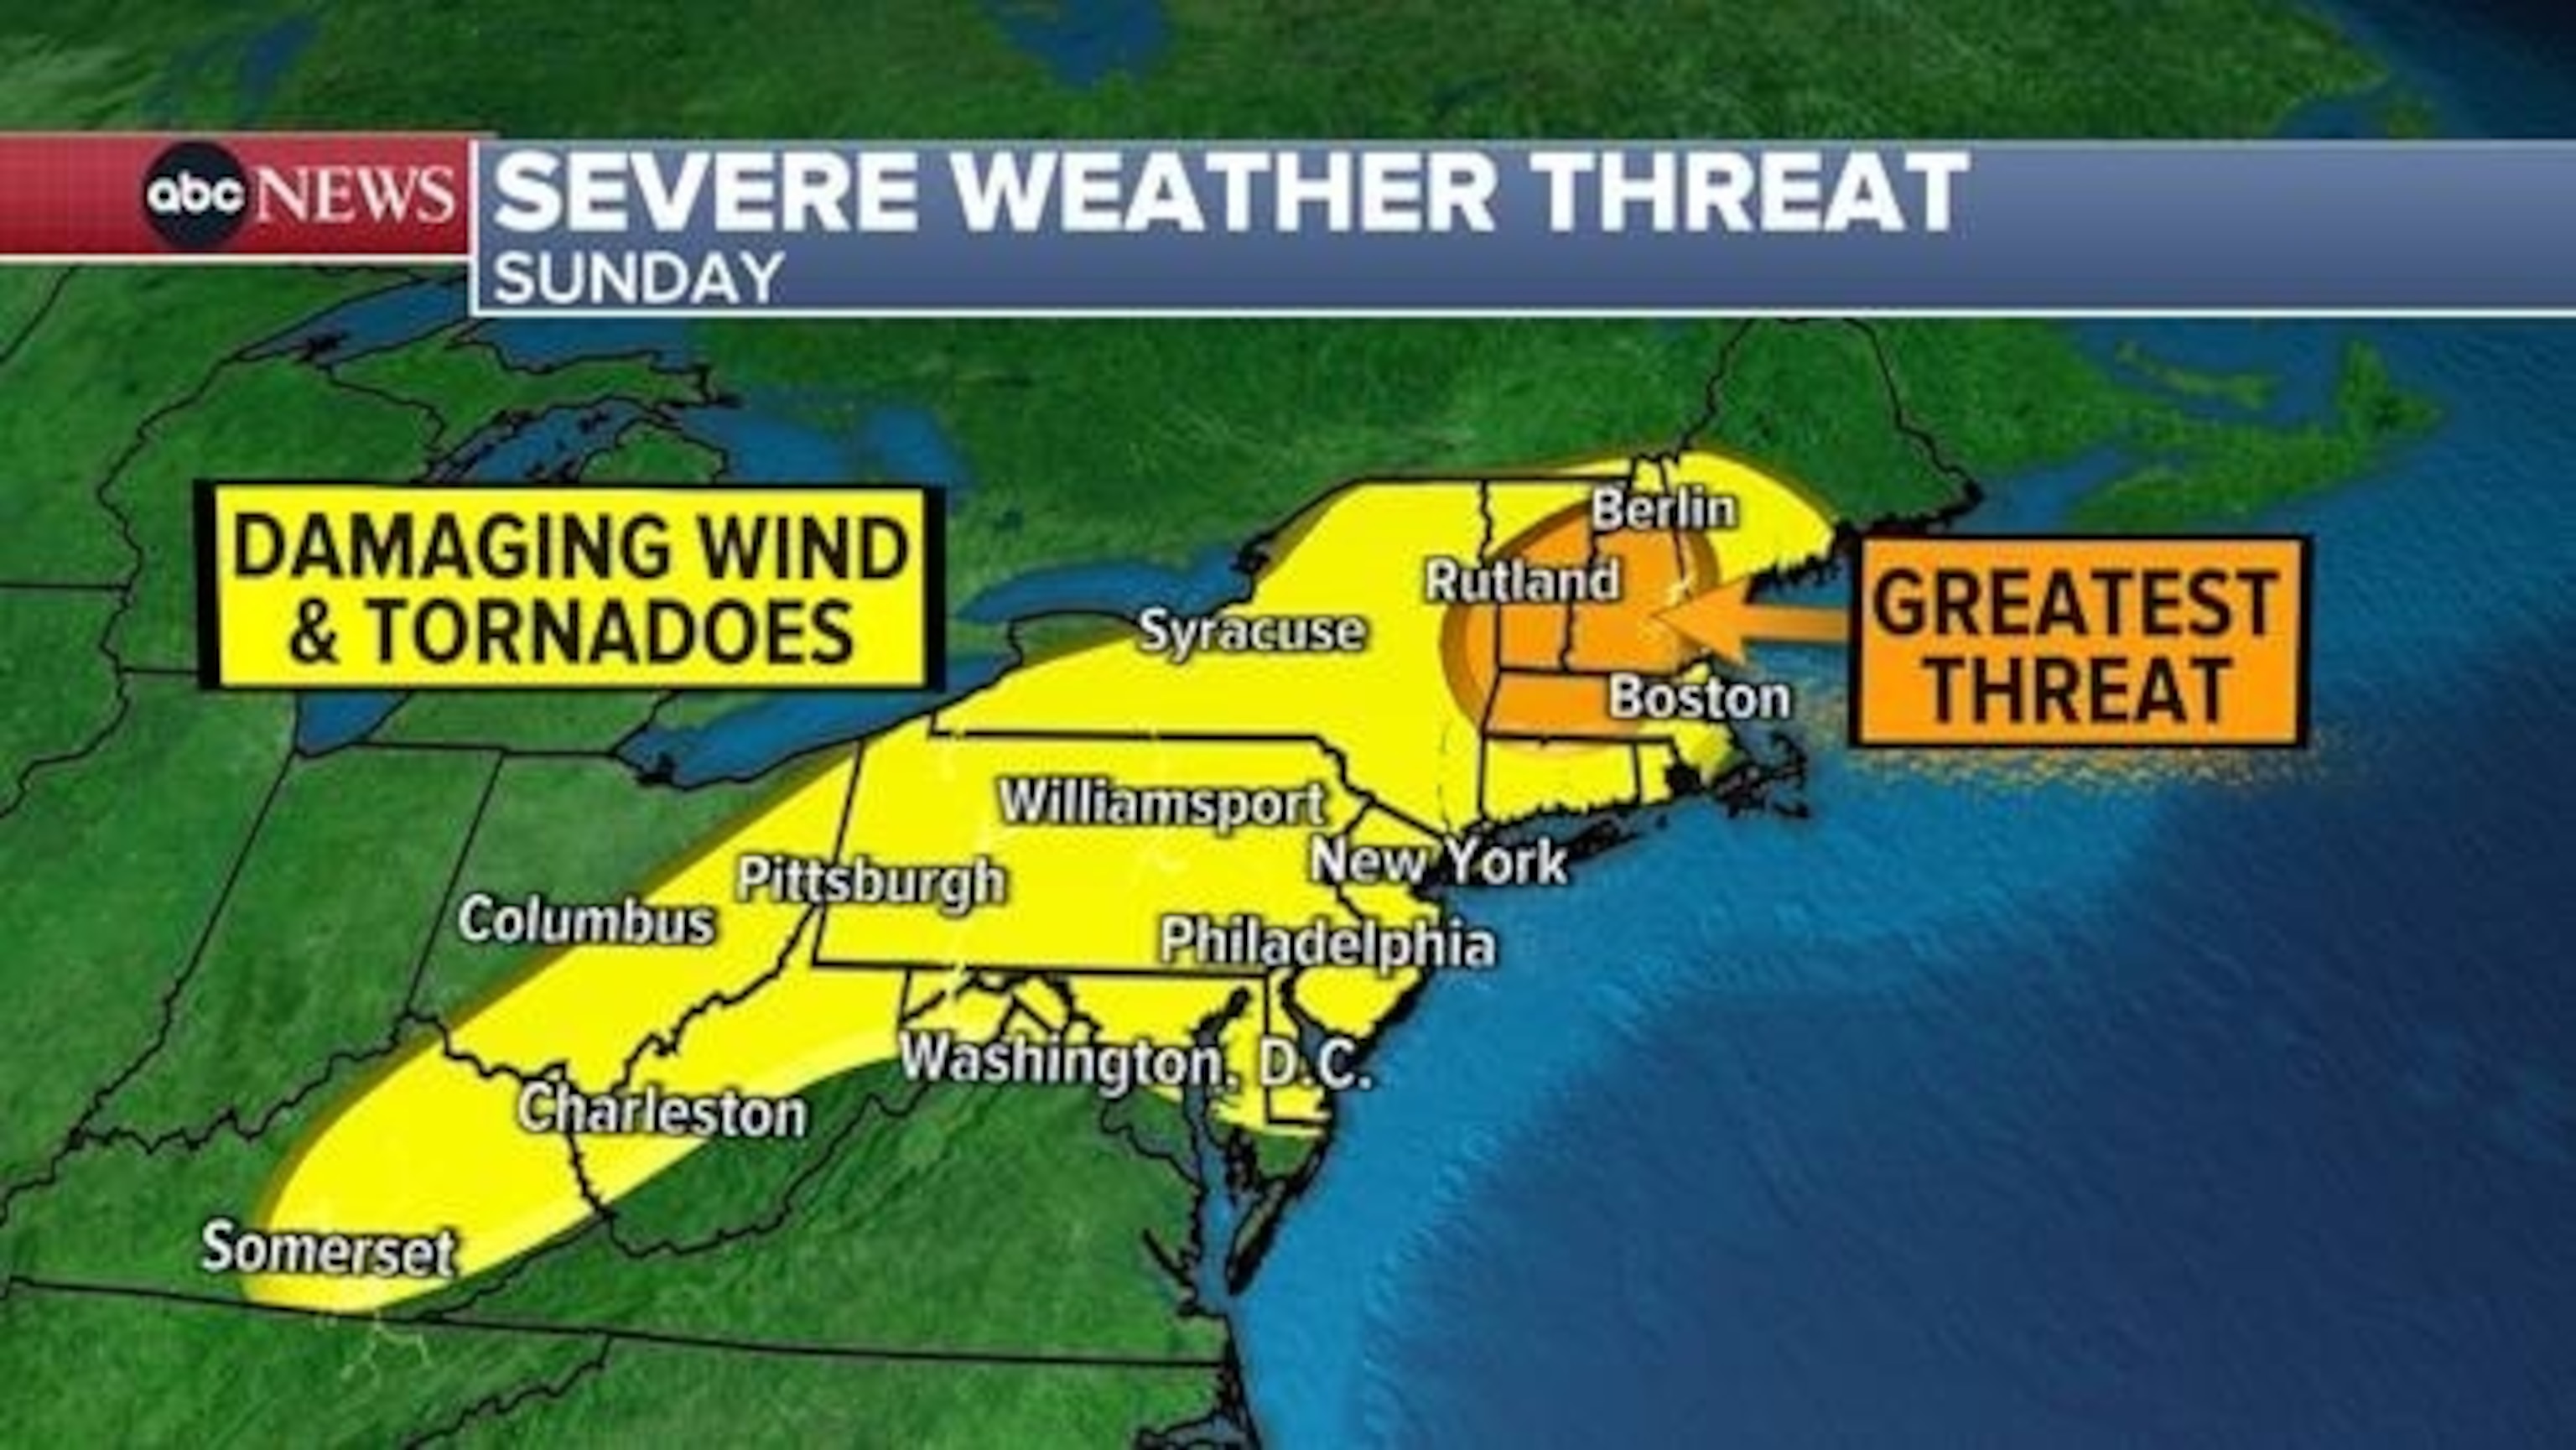 PHOTO: Severe weather threat map.